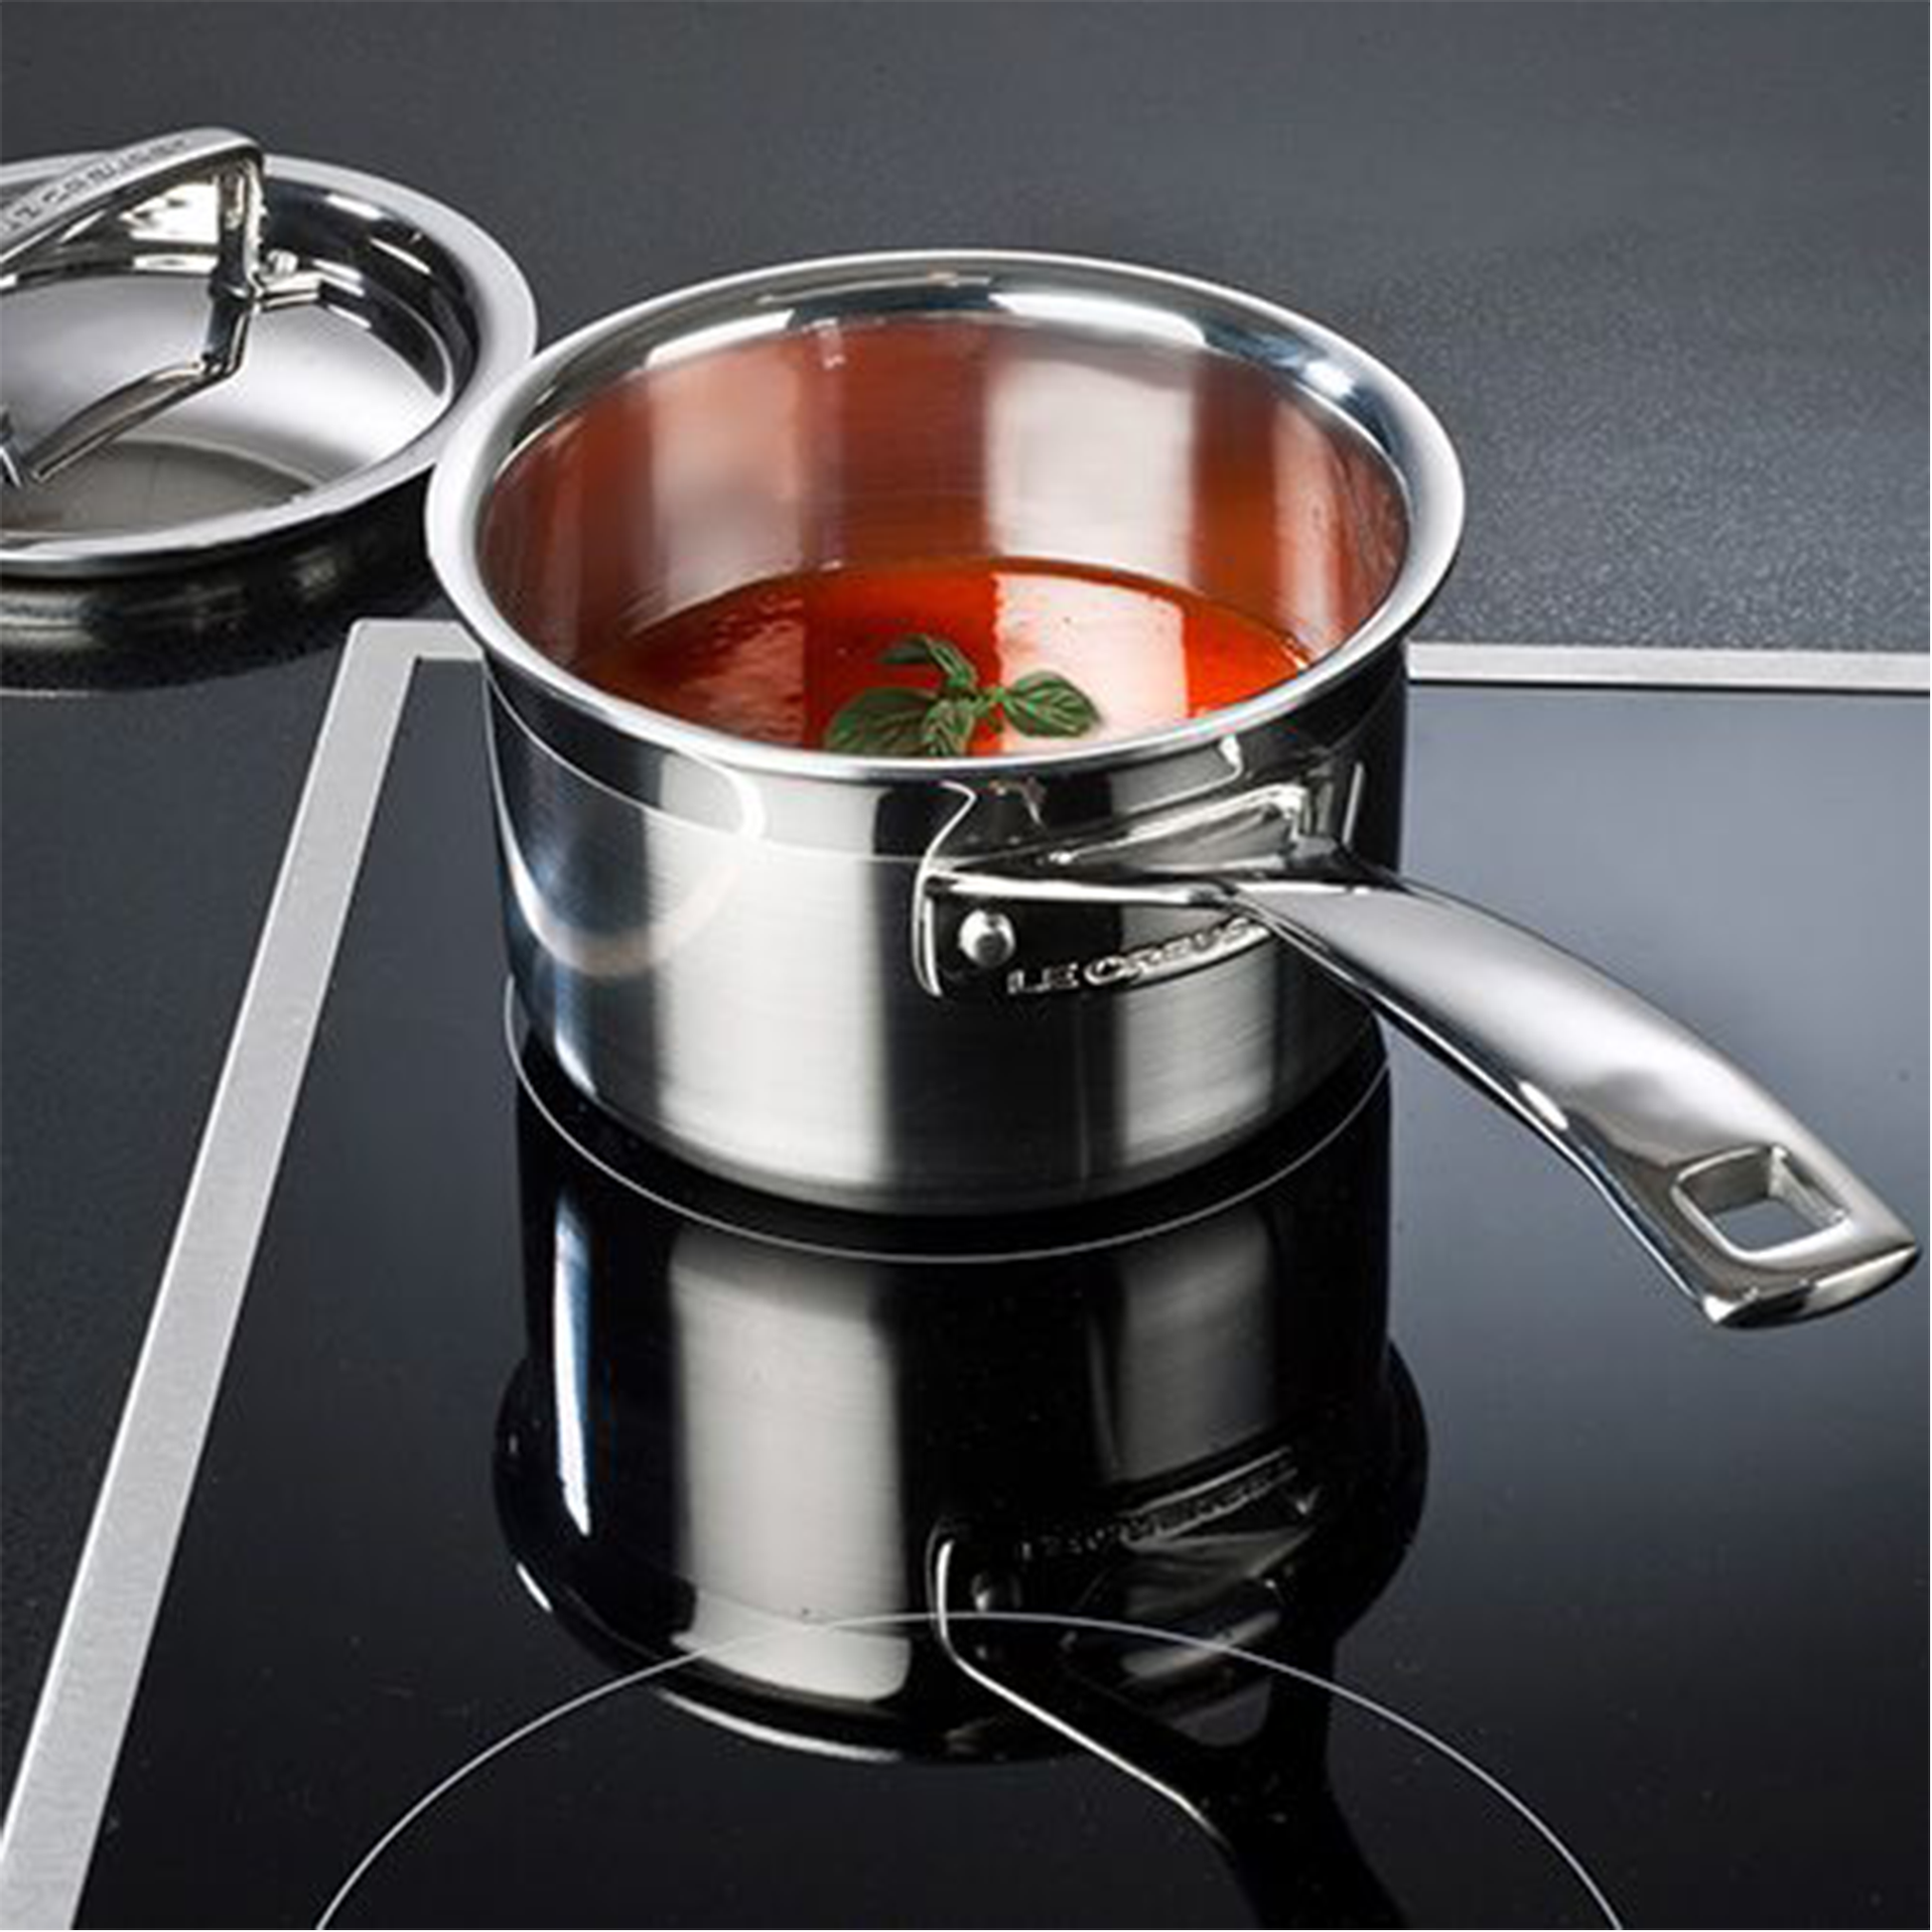 the saucepan being used to cook tomato soup